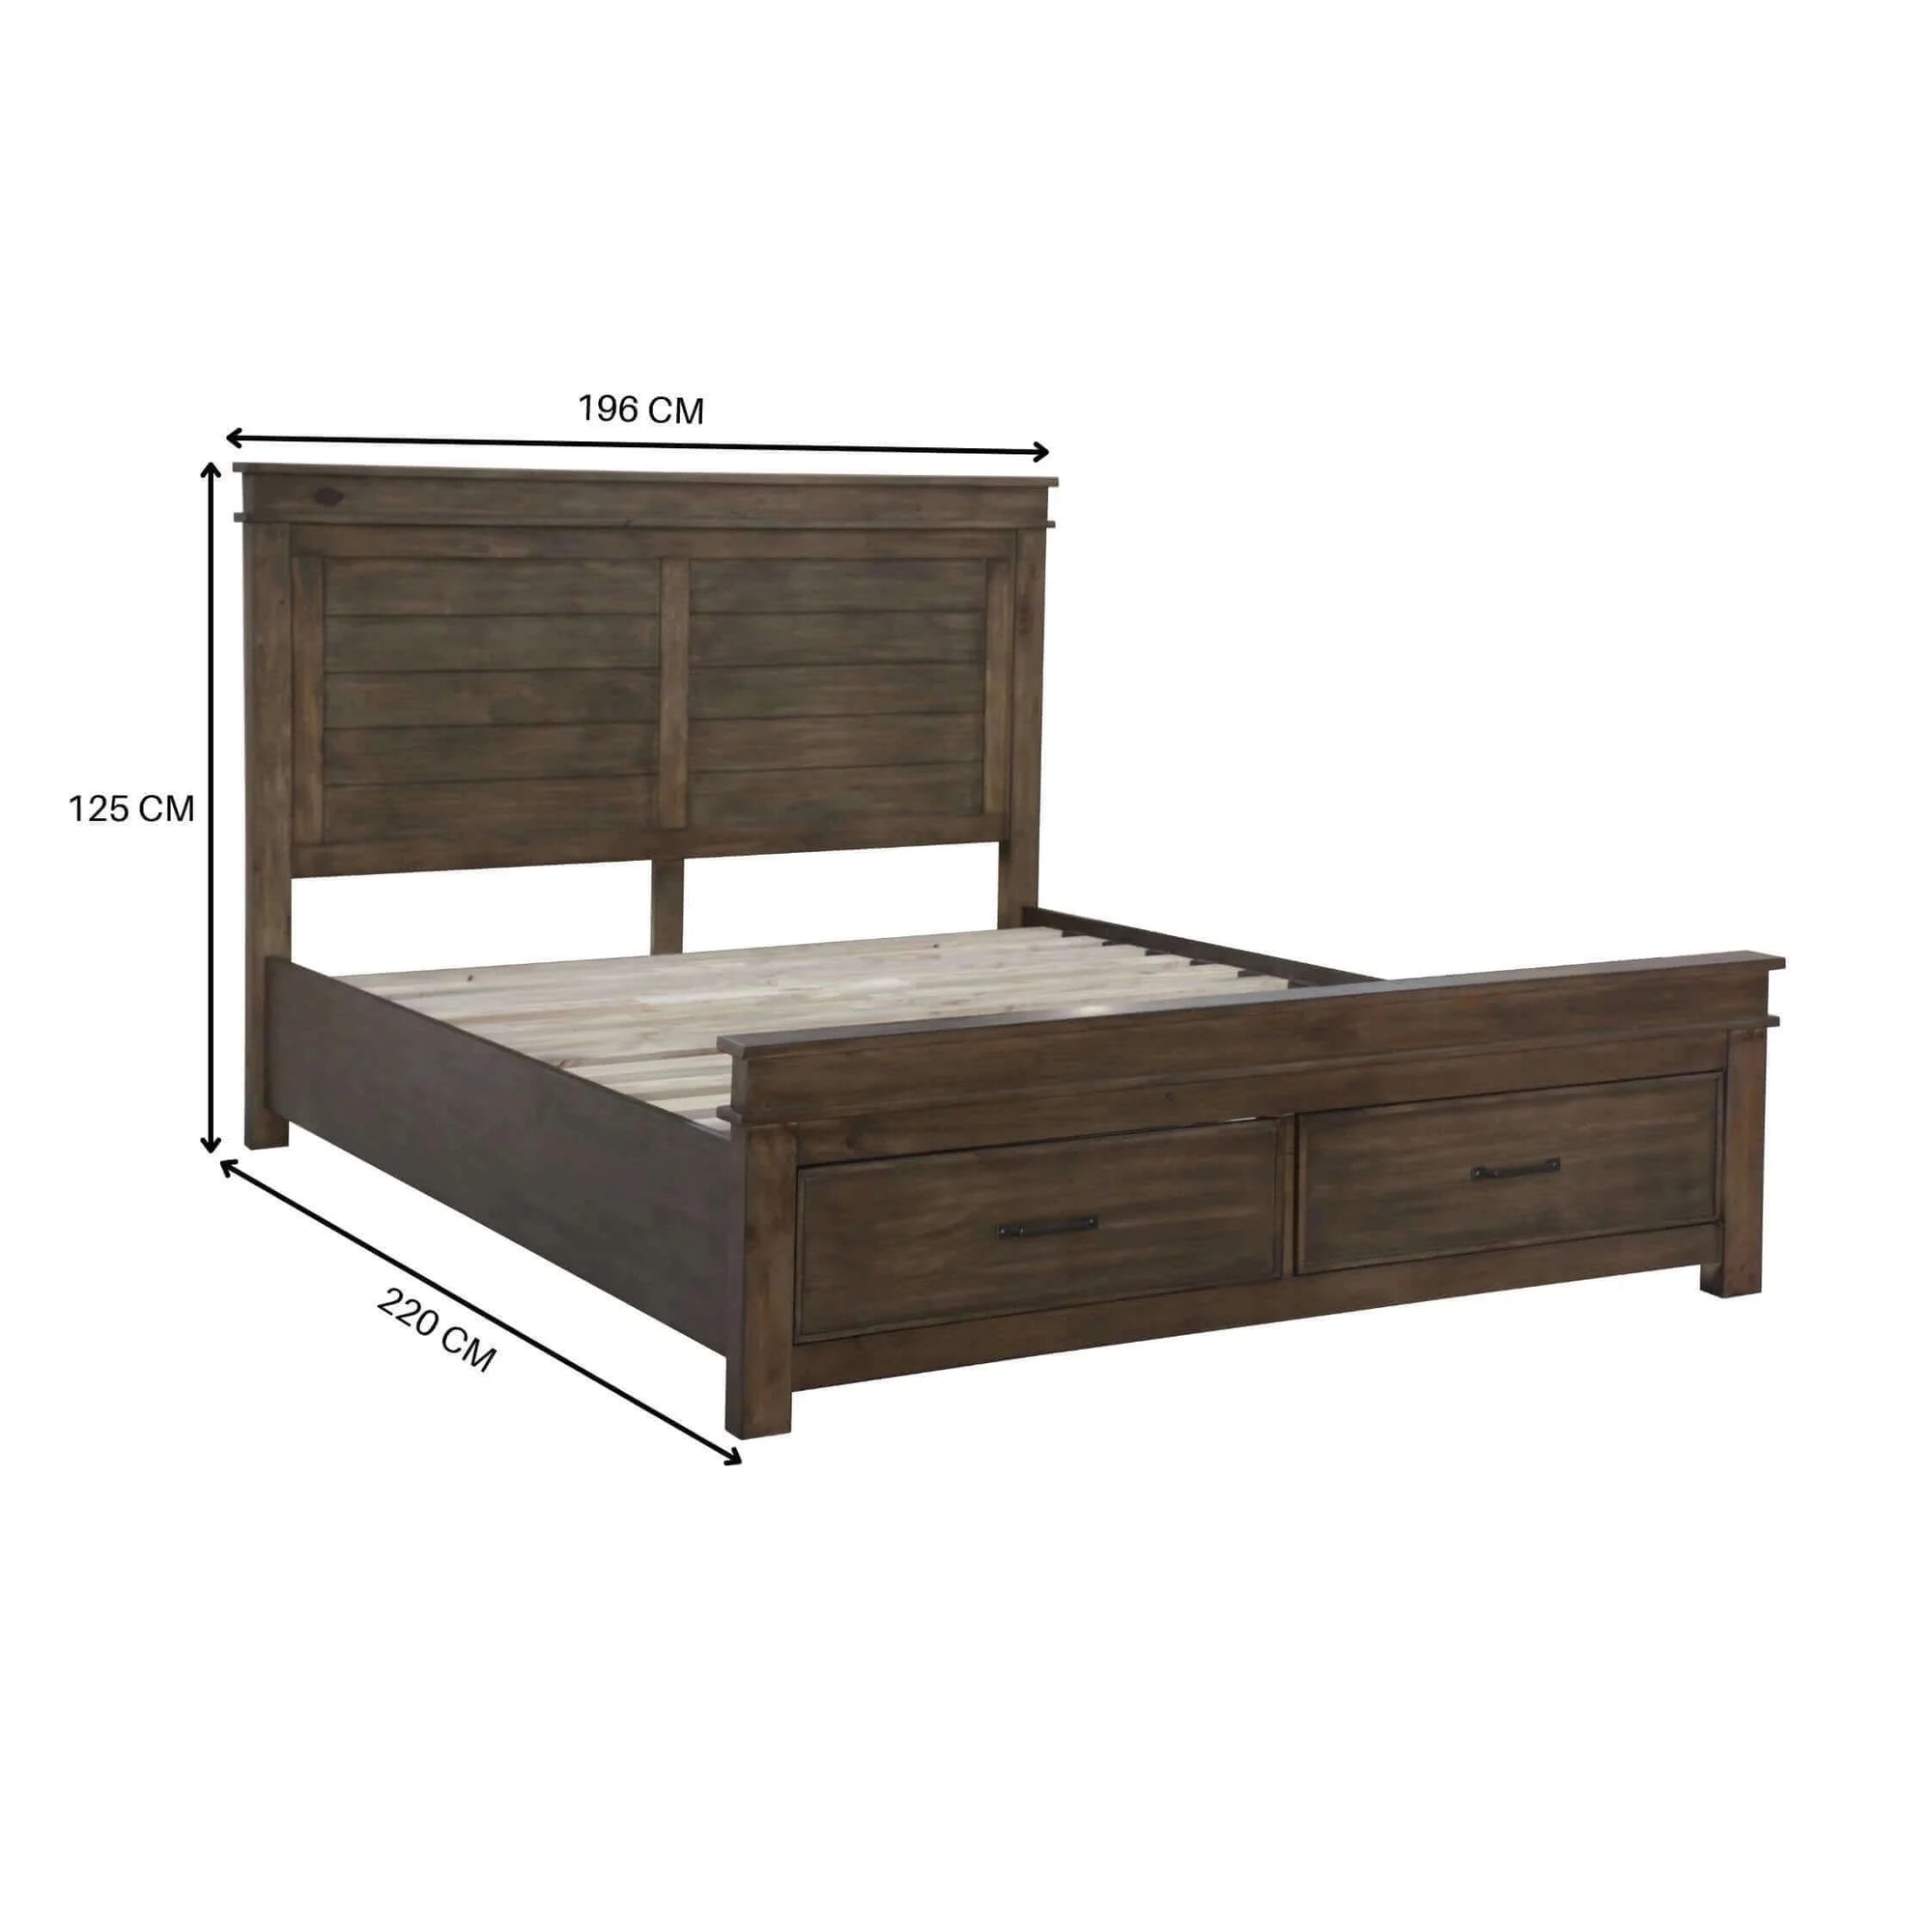 Buy lily bed frame king size timber mattress base with storage drawers - rustic grey - upinteriors-Upinteriors